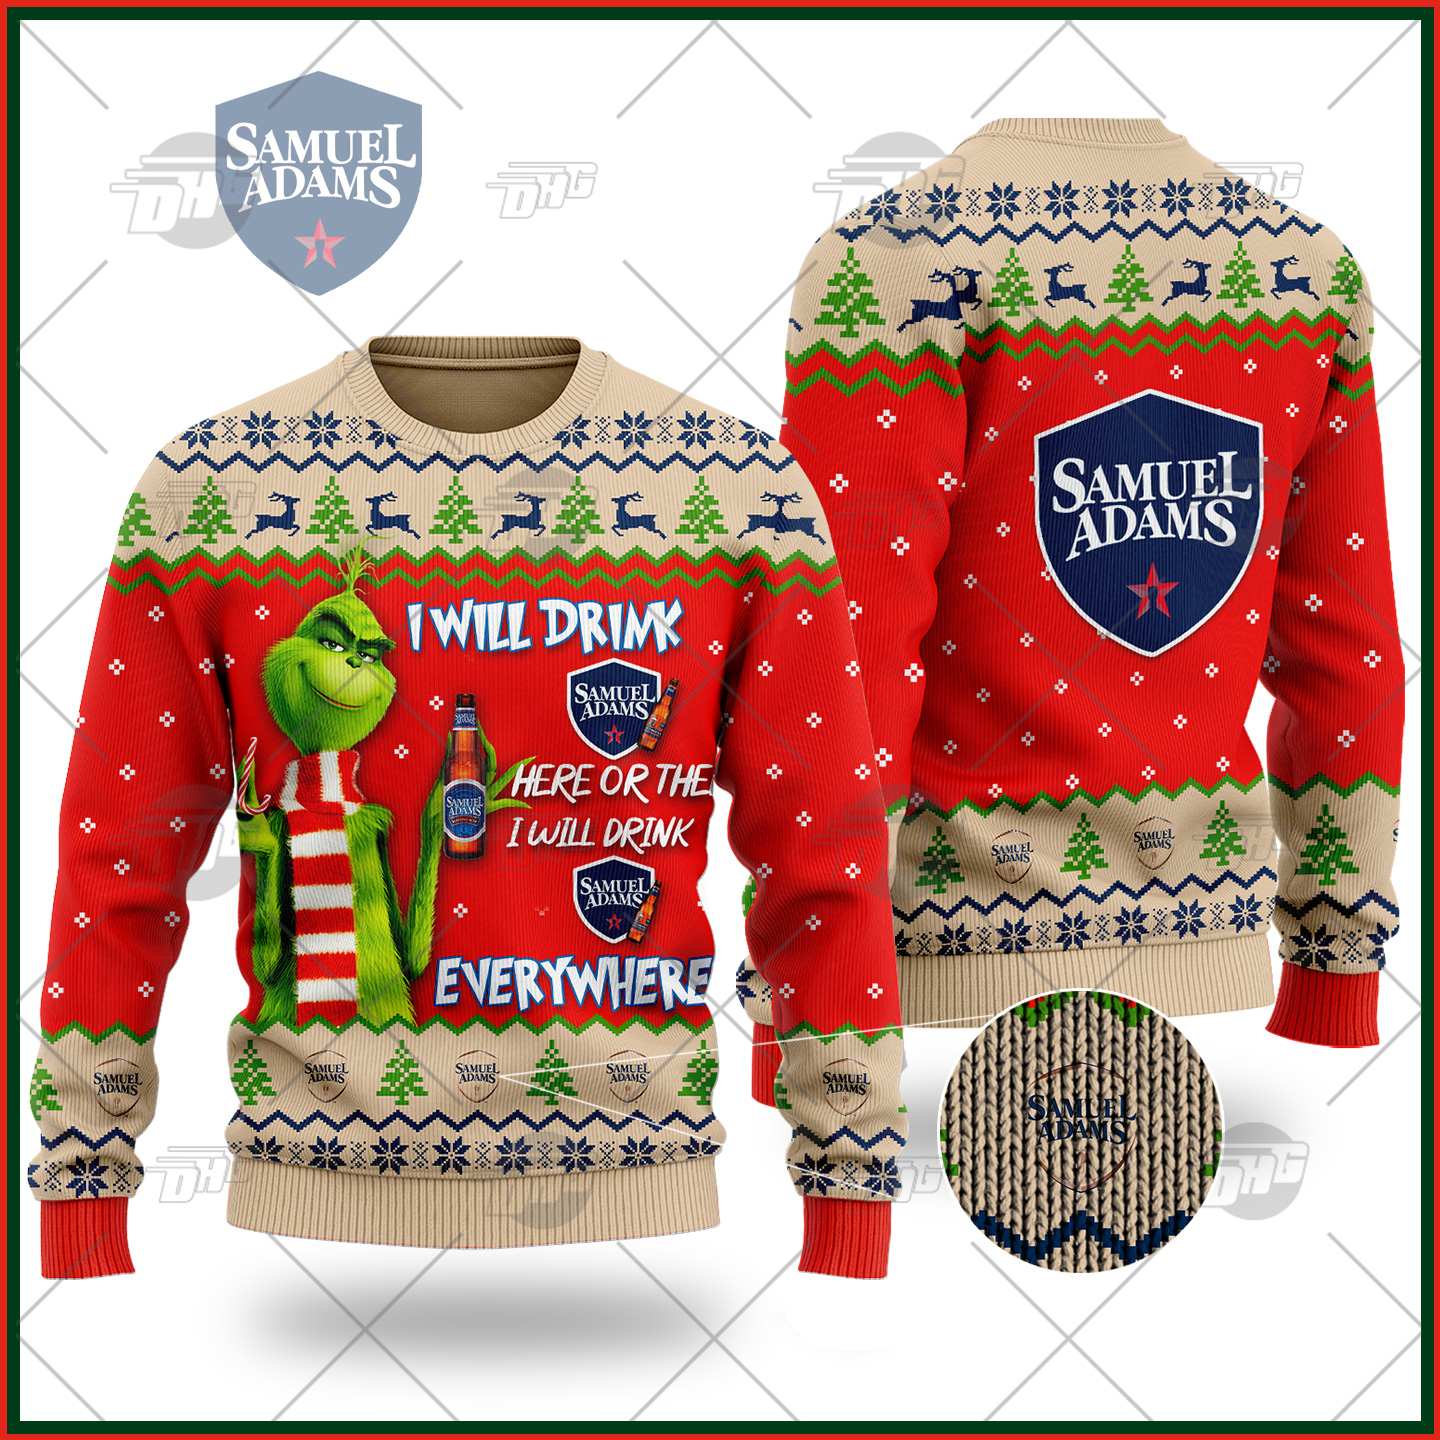 [ Amazing ] Grinch I Will Drink Here Or There I Will Drink Everywhere Samuel Adams Beer Ugly Christmas Holiday Sweater – Saleoff 291121